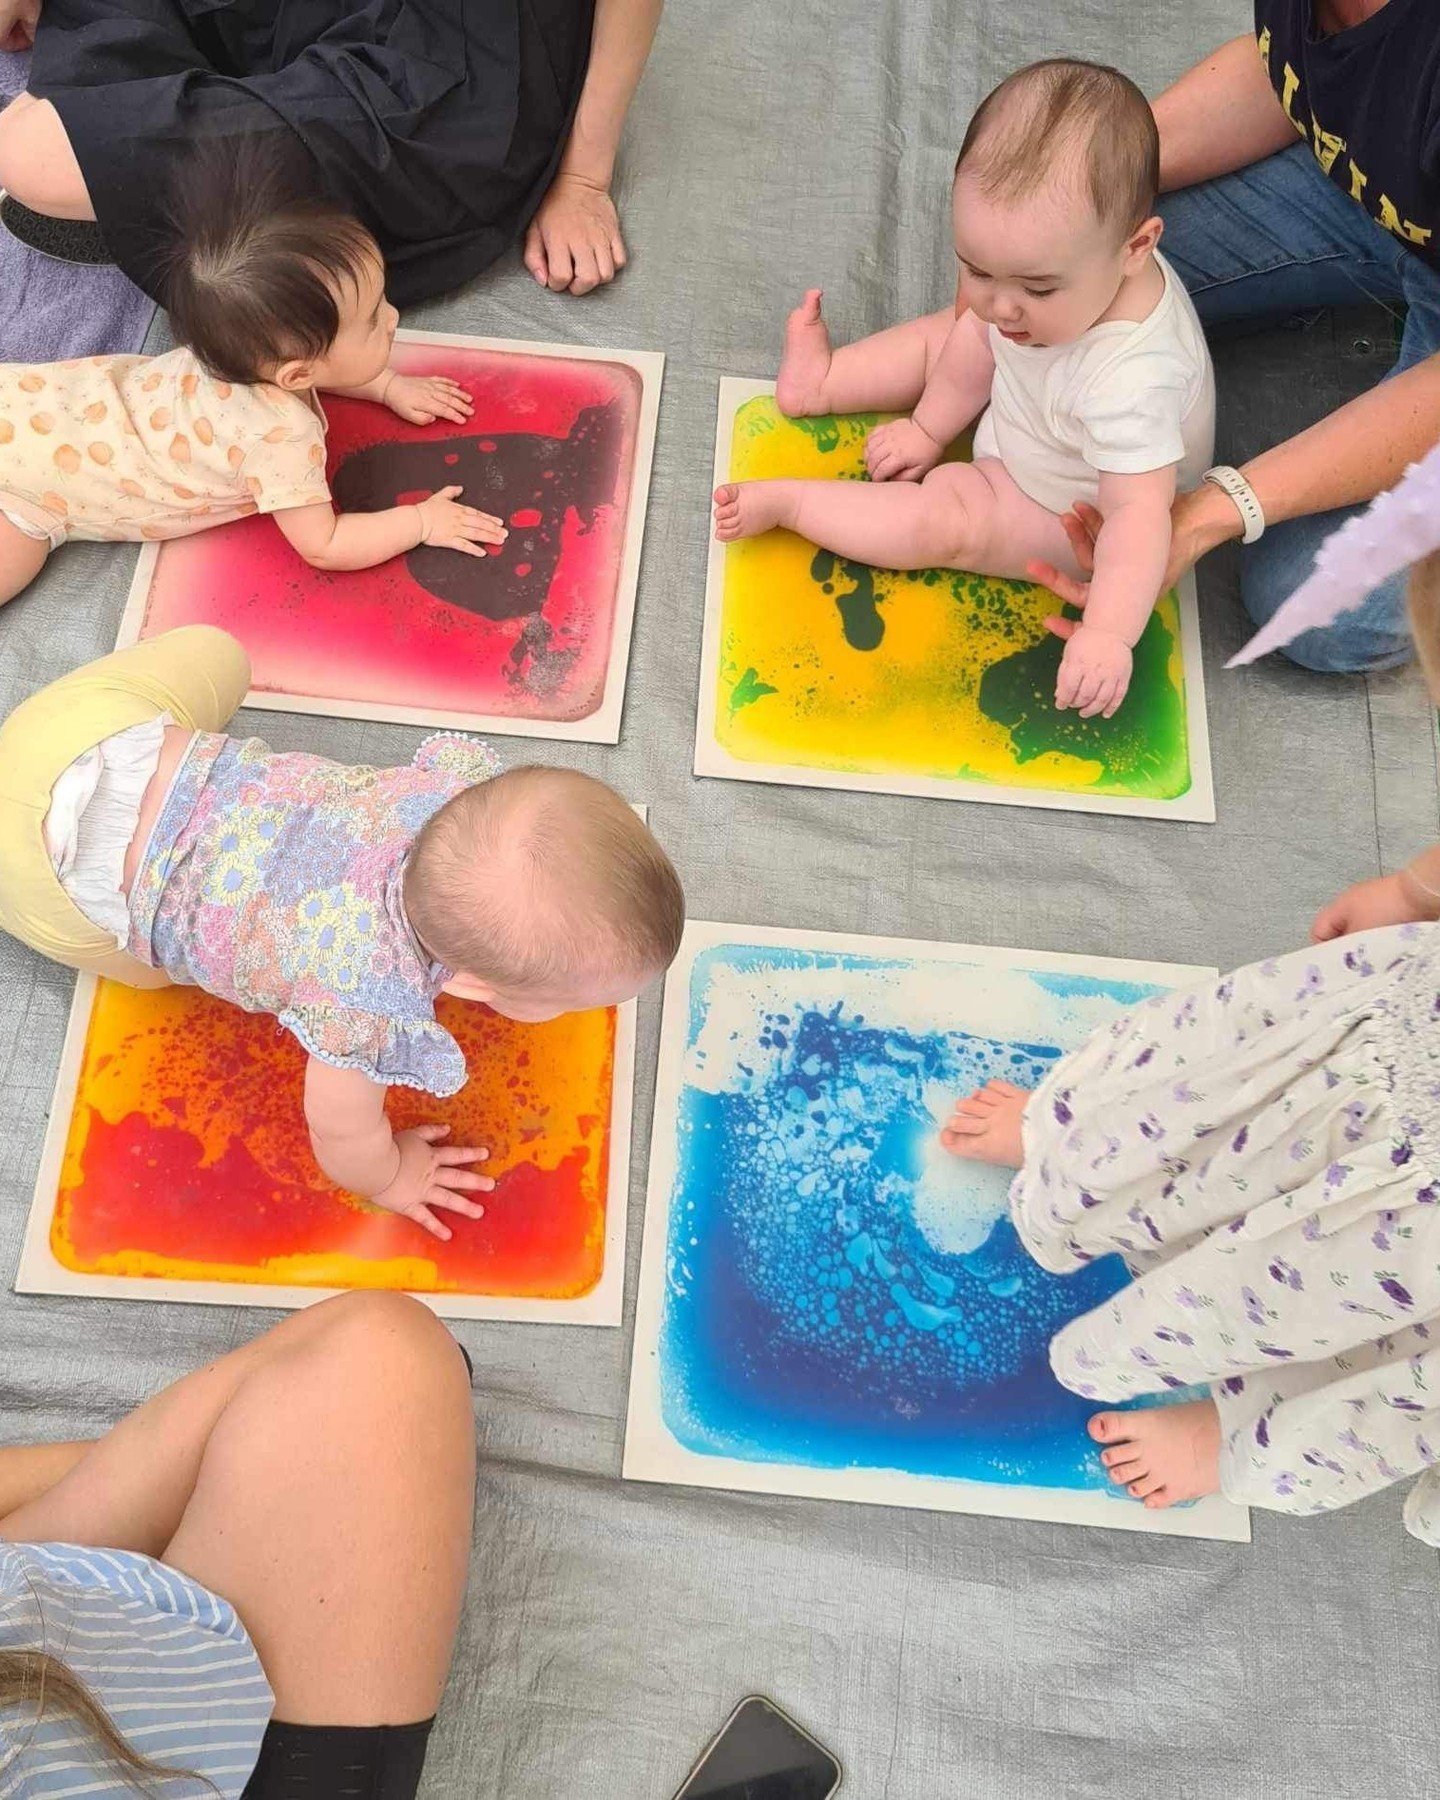 Calling all tiny adventurers and their mums! 🍼🎨
Join us for a morning of Messy Makers - where little ones can discover, create and learn through sensory and craft activities. Mums, enjoy some well-deserved adult conversation while your tiny tribe e